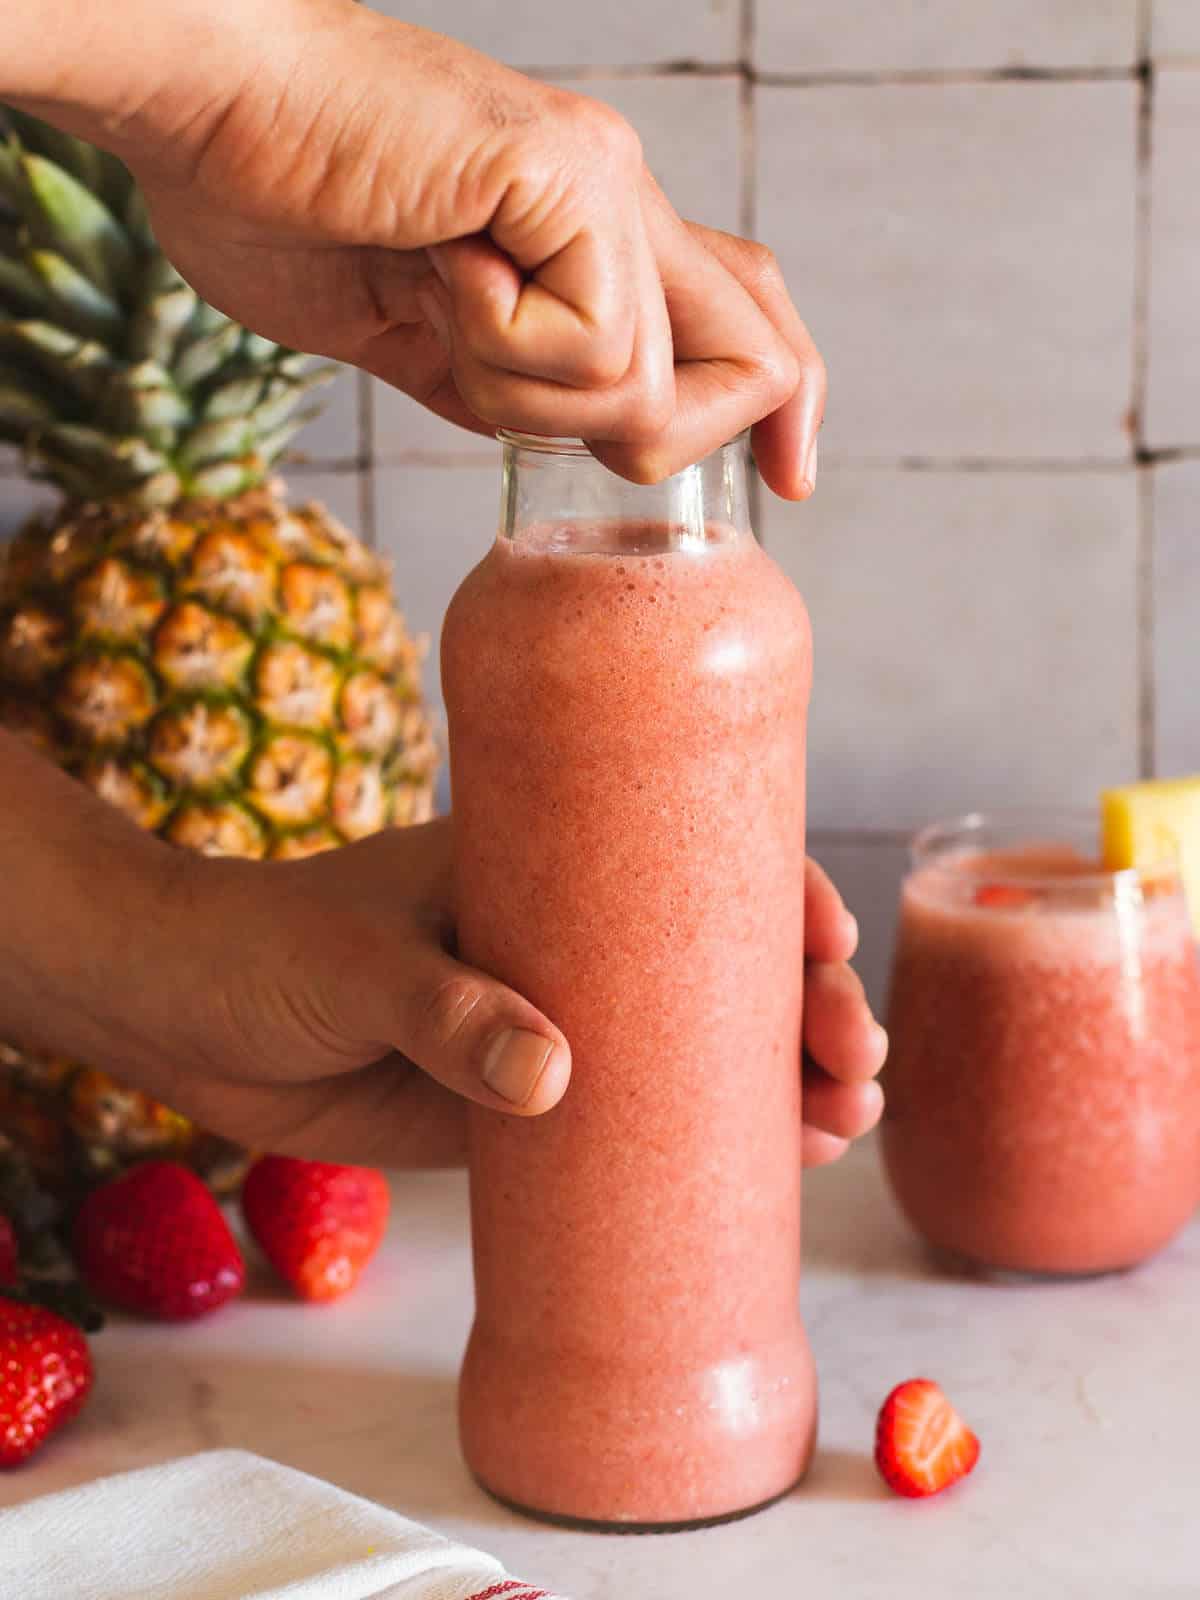 store the strawberry pineapple smoothie using an airtight container